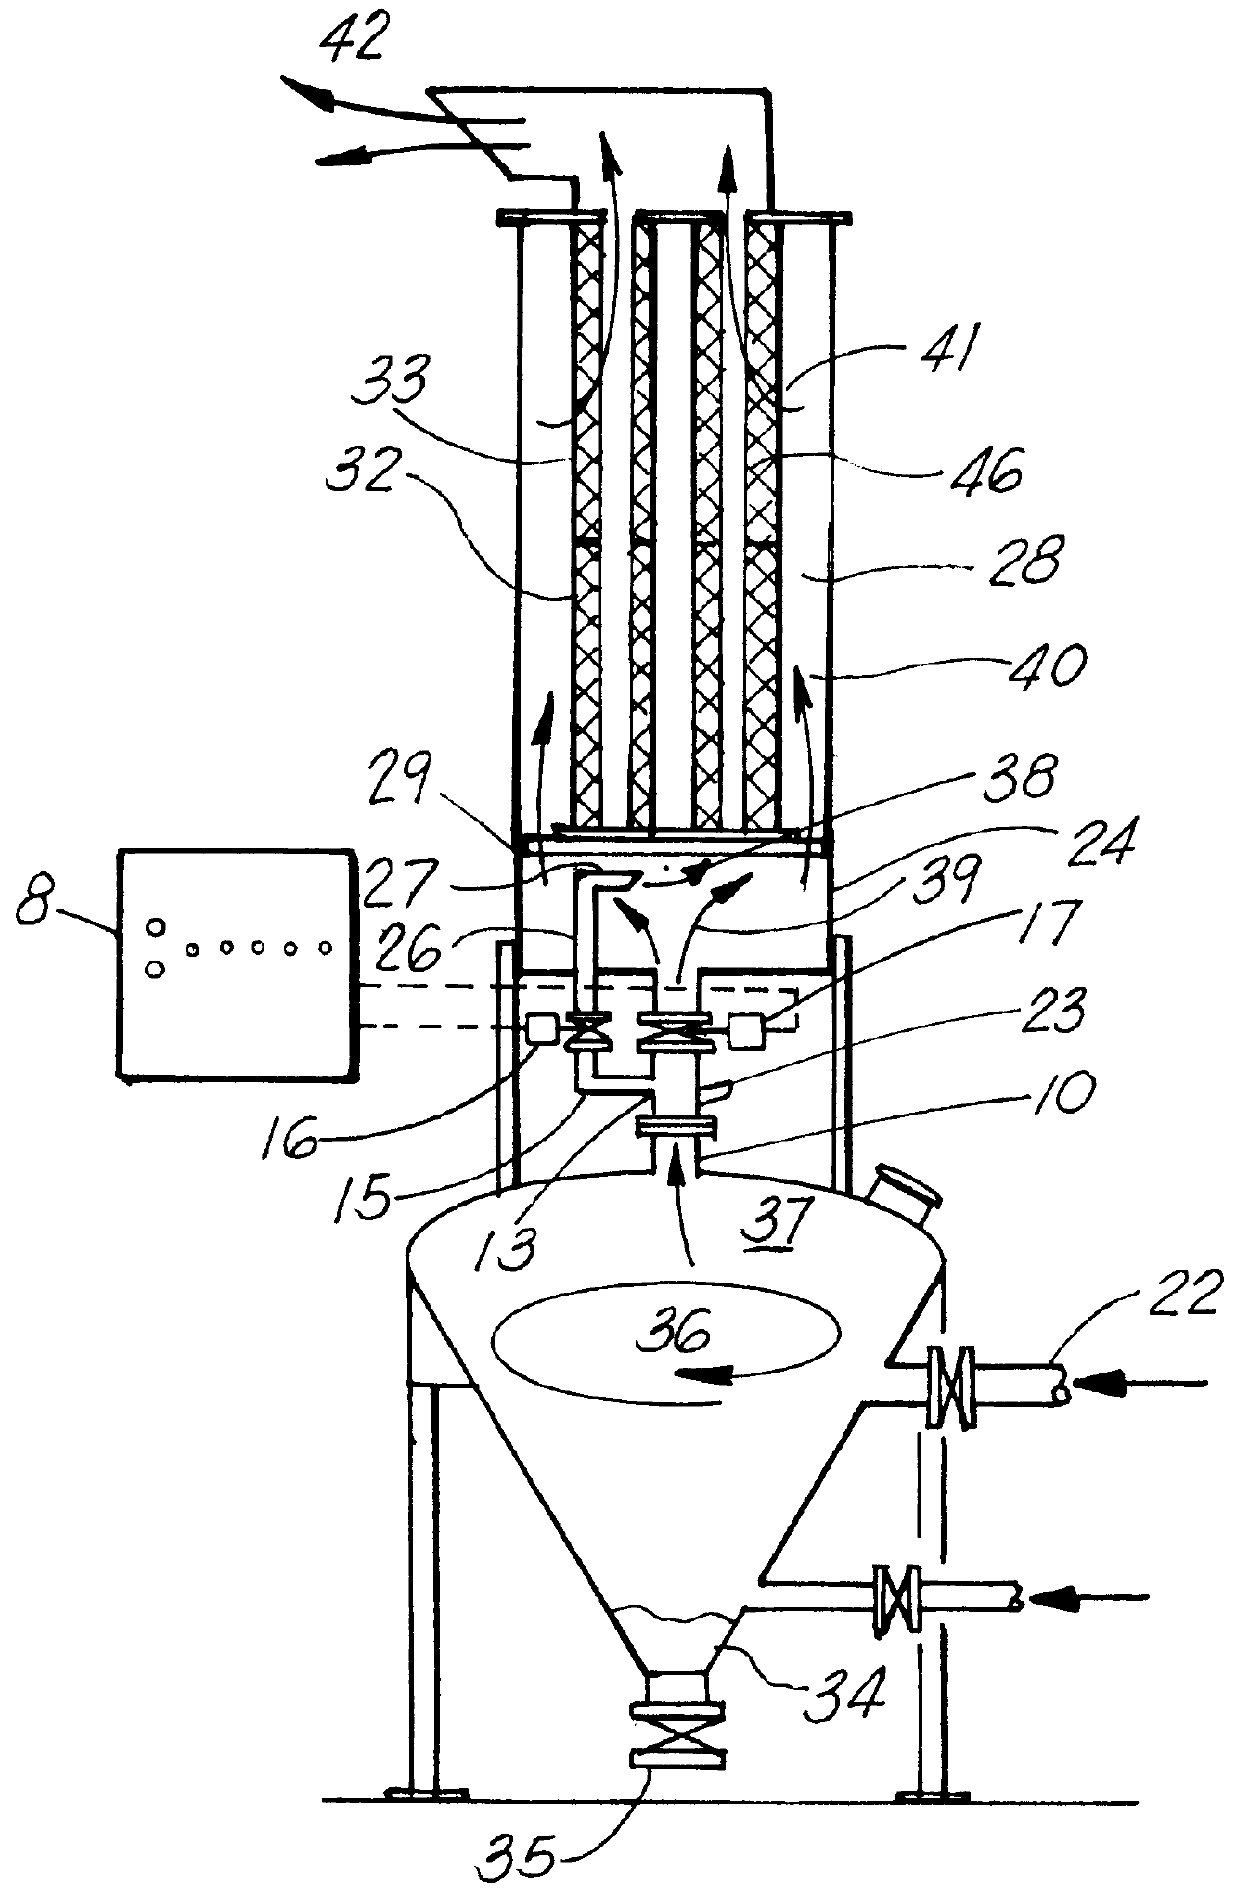 System for depressurizing, filtering, and noise suppression of high pressure pneumatic vessels